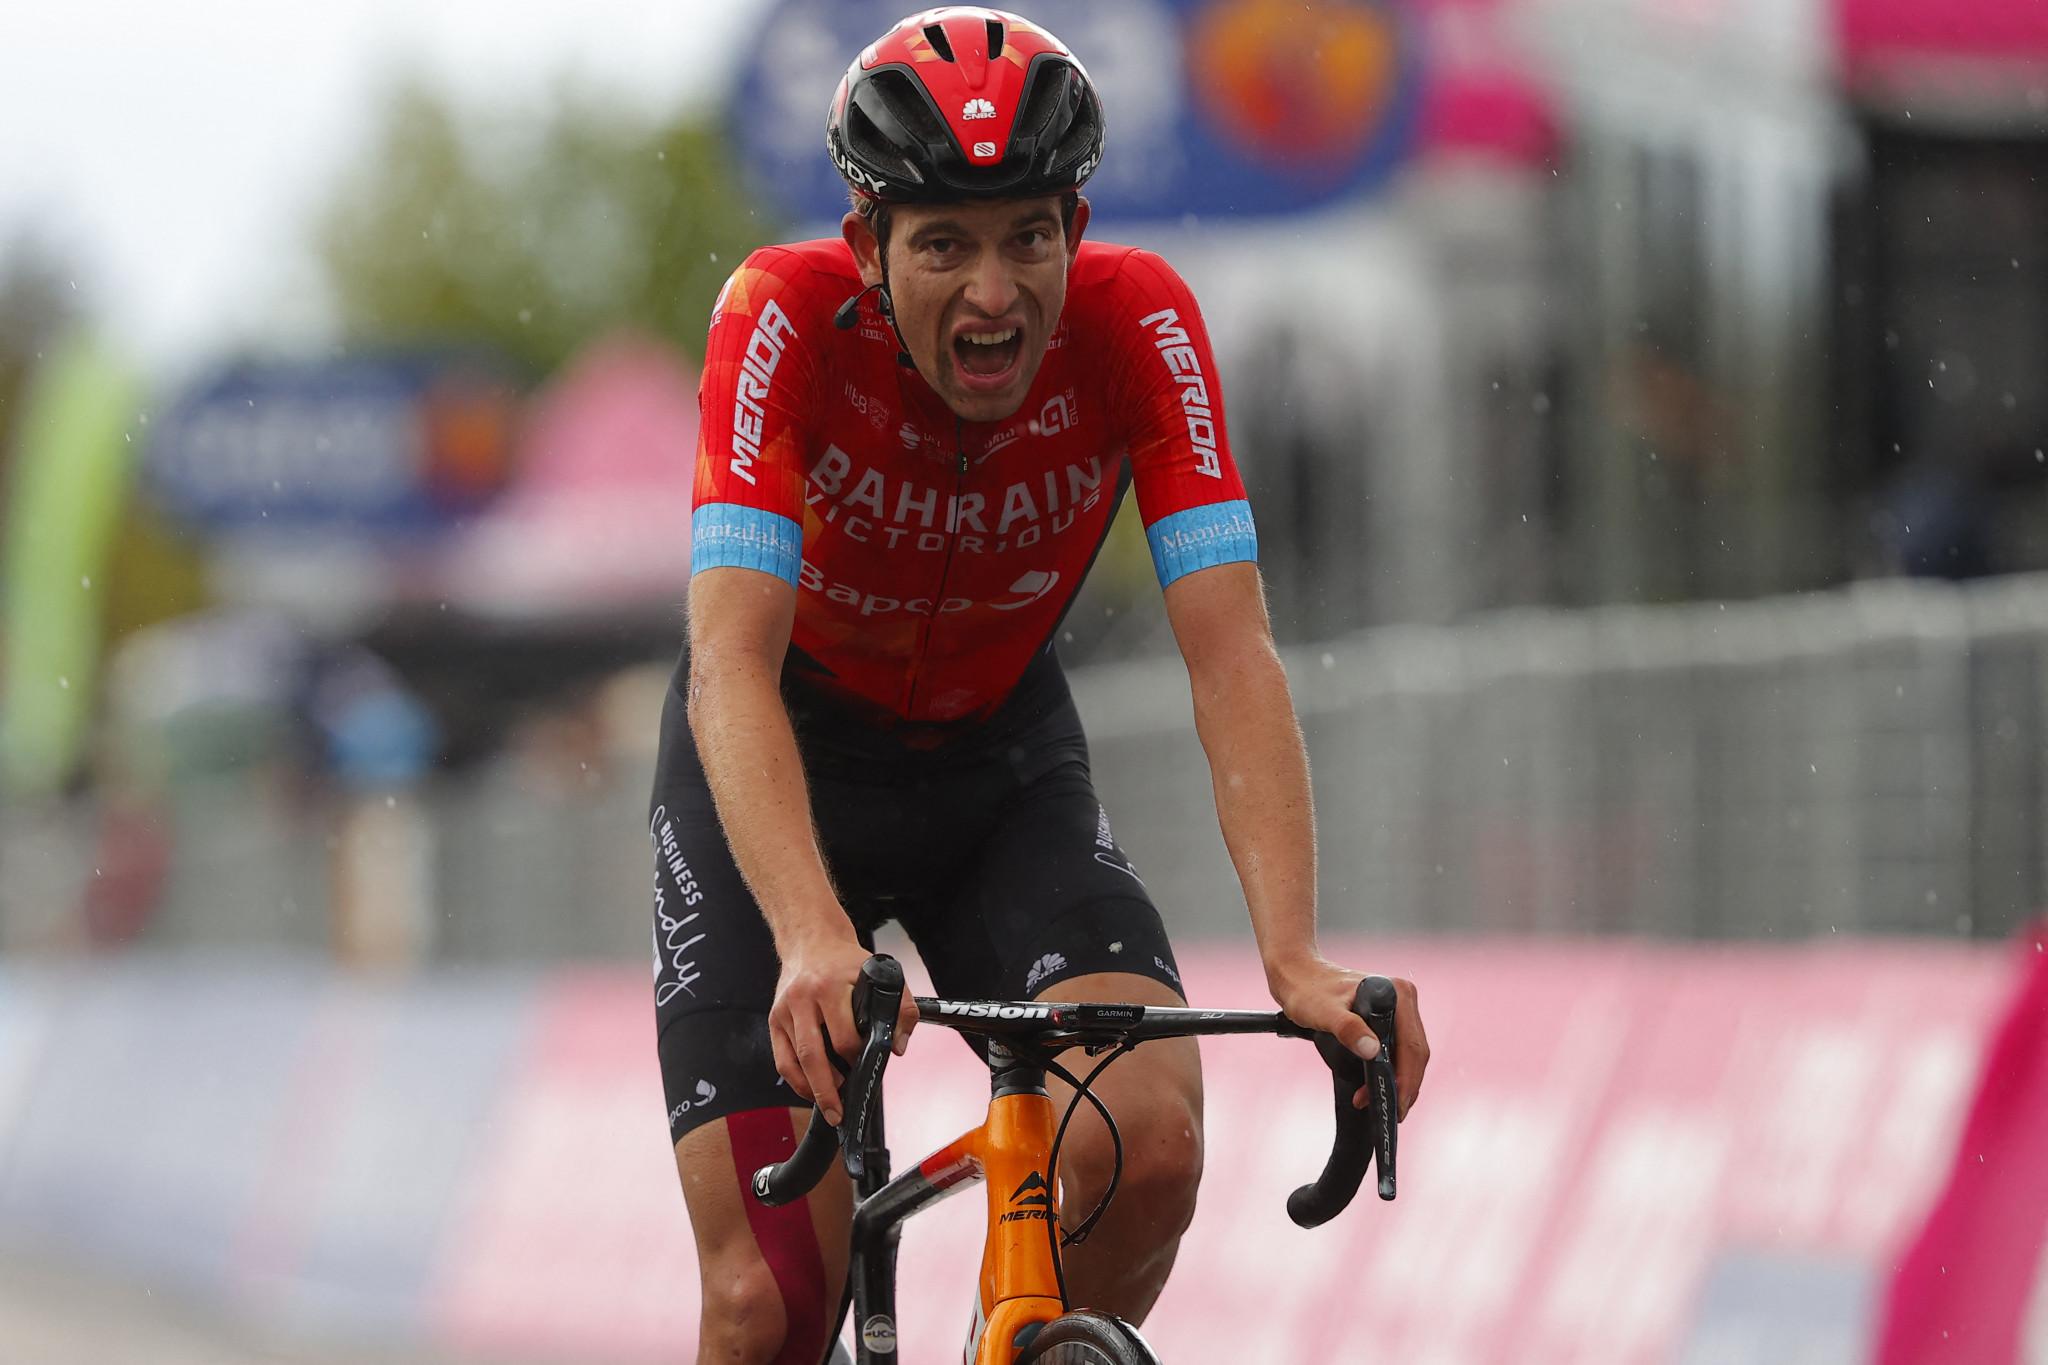 Mäder wins stage six of Giro d'Italia as Valter takes lead in general classification